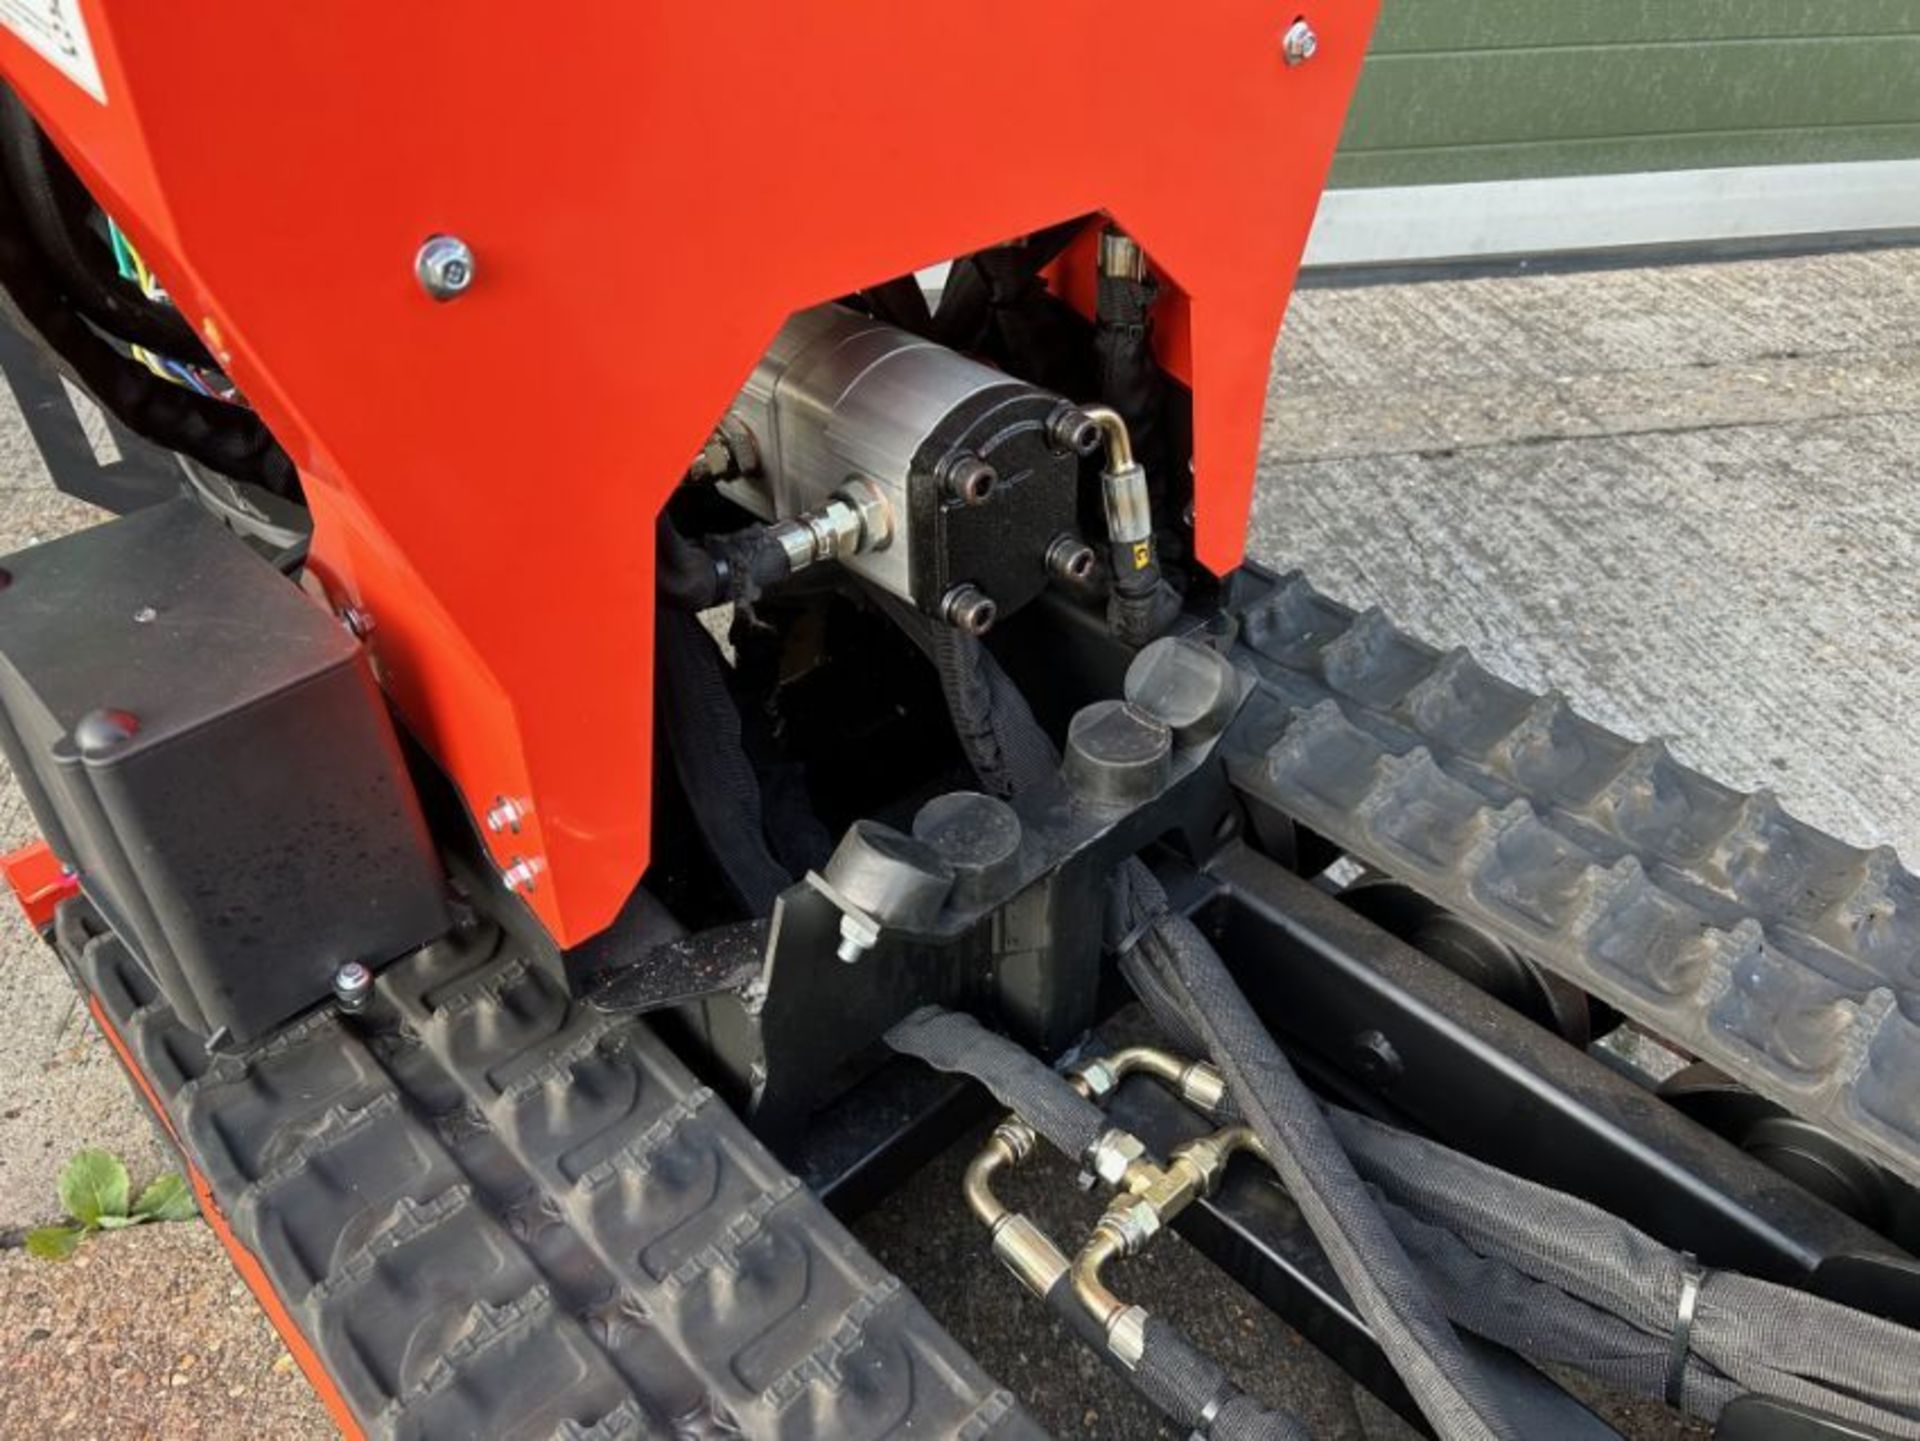 New and unused Armstrong DR-MD-150PRO Self-Loading Tracked Dumper - Image 18 of 21